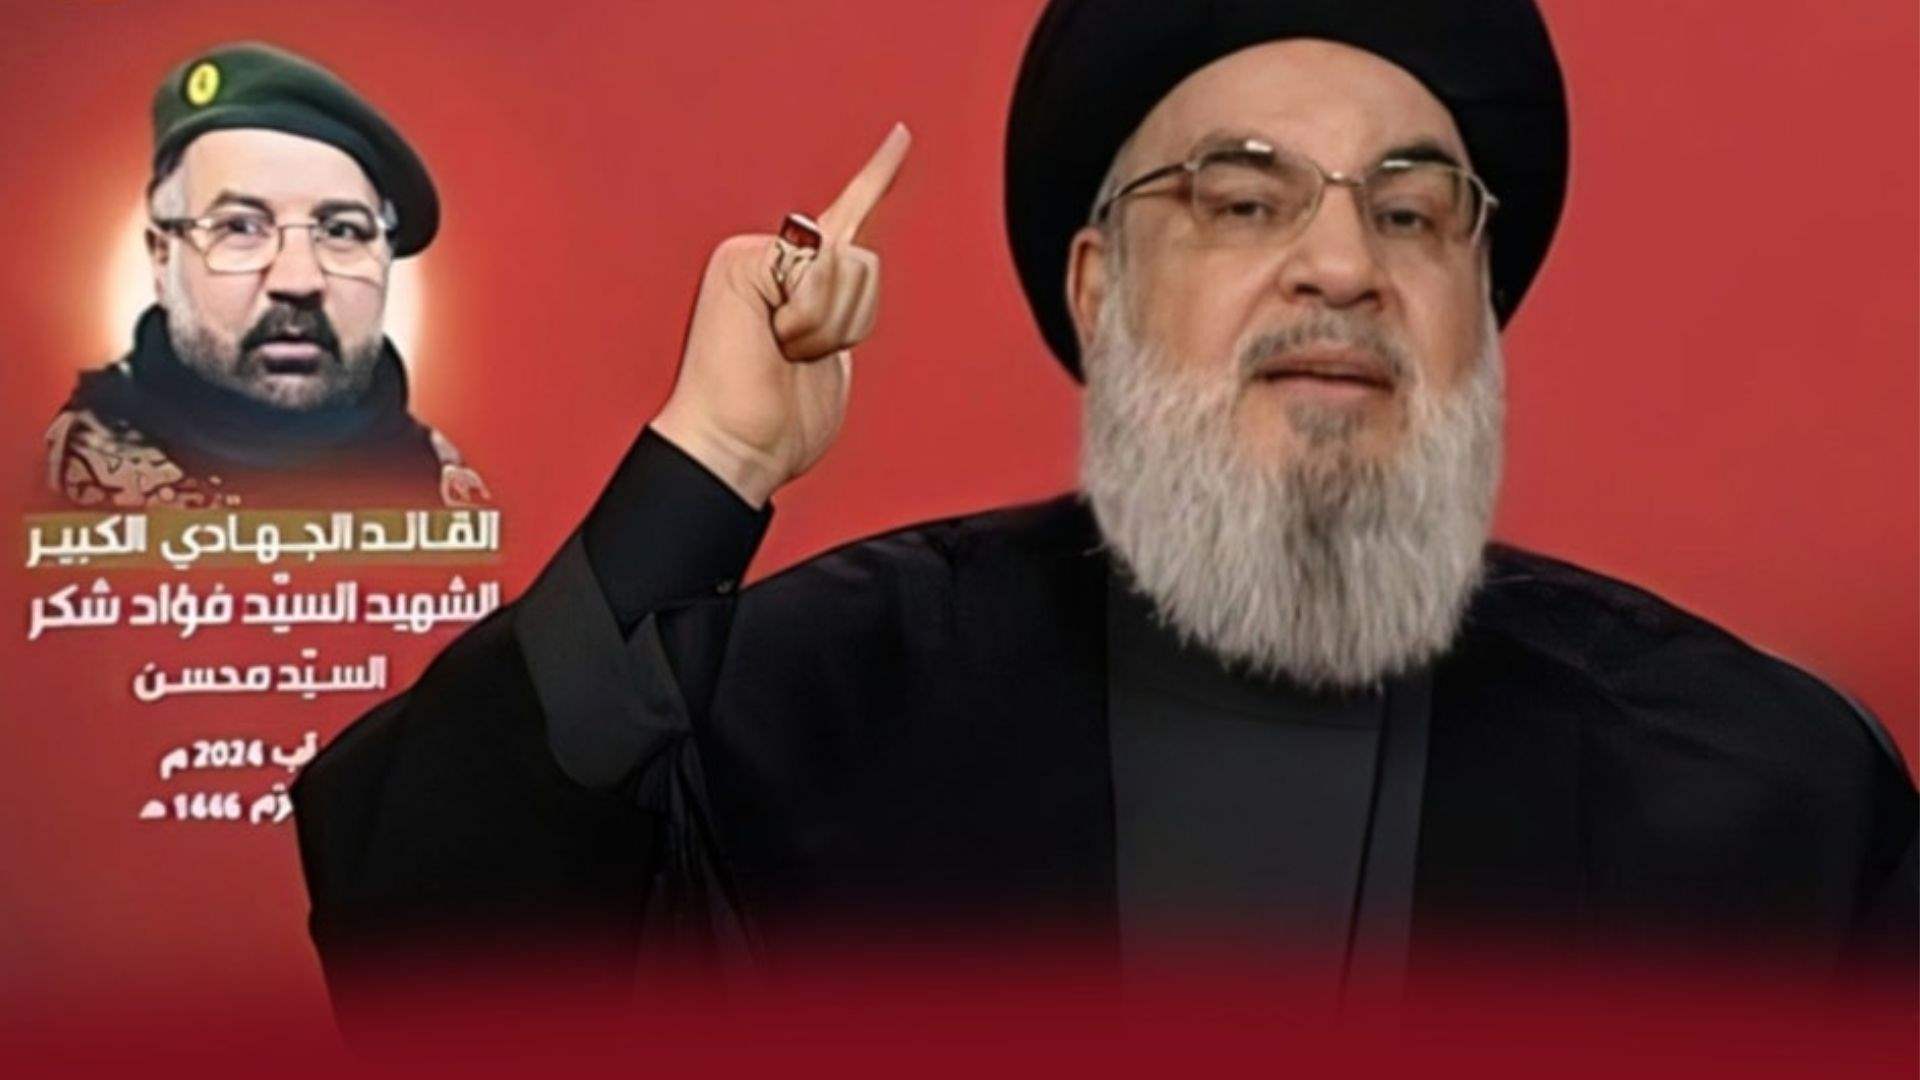 In major address, Hezbollah&#39;s Nasrallah honors Fouad Shokor and promises &#39;imminent response&#39; to Israeli aggression - Key remarks